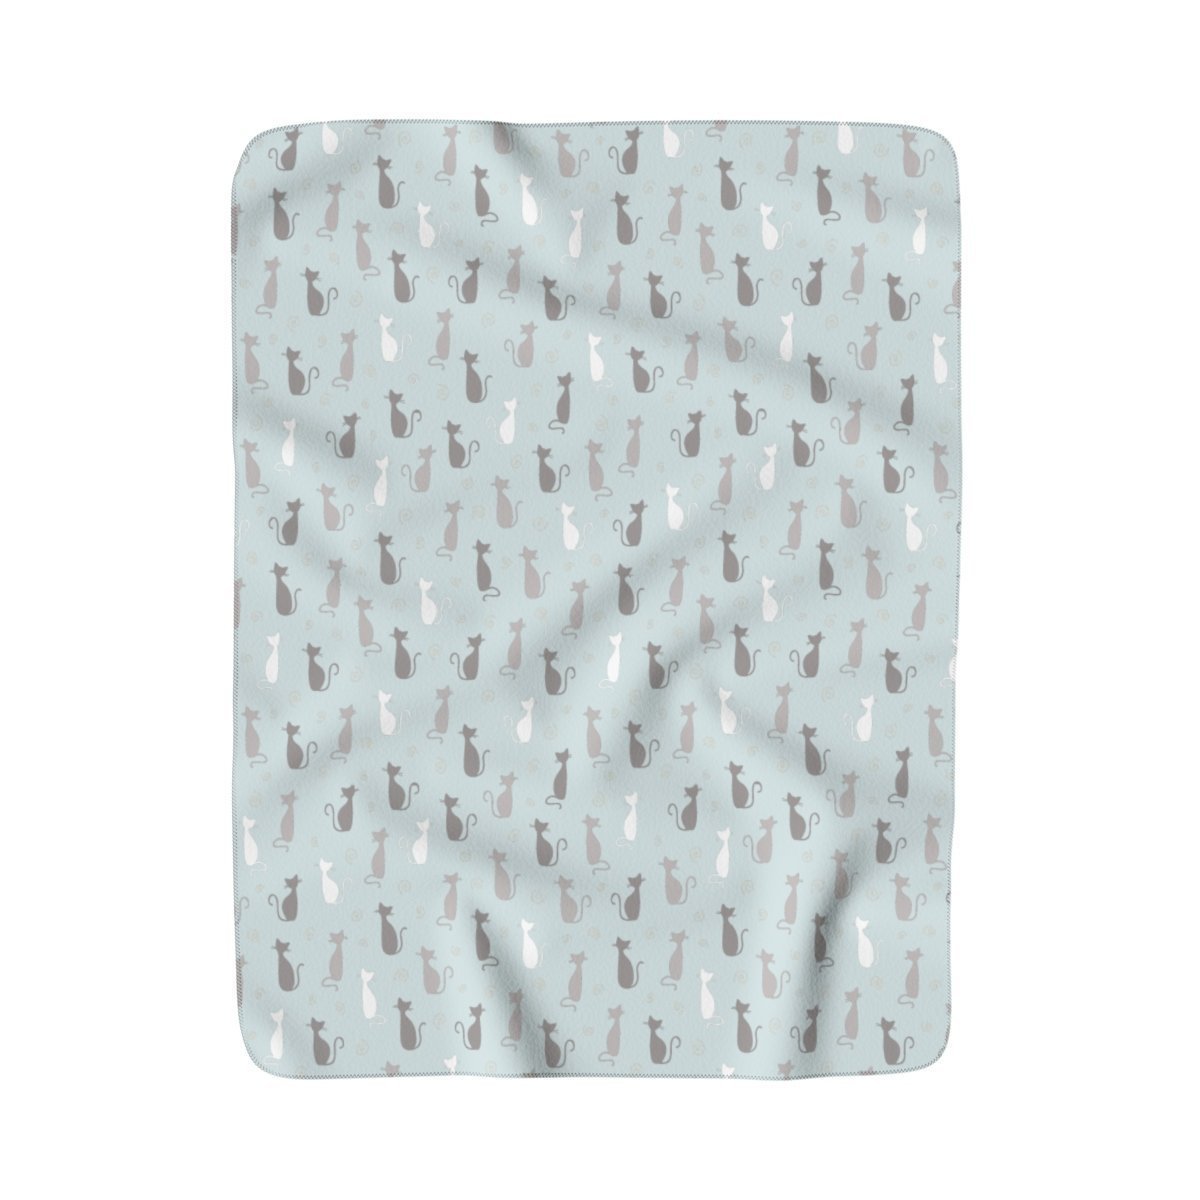 This cat fleece blanket features a unique cat print in white, gray, and blue colors that bring a beach house feel to your space.